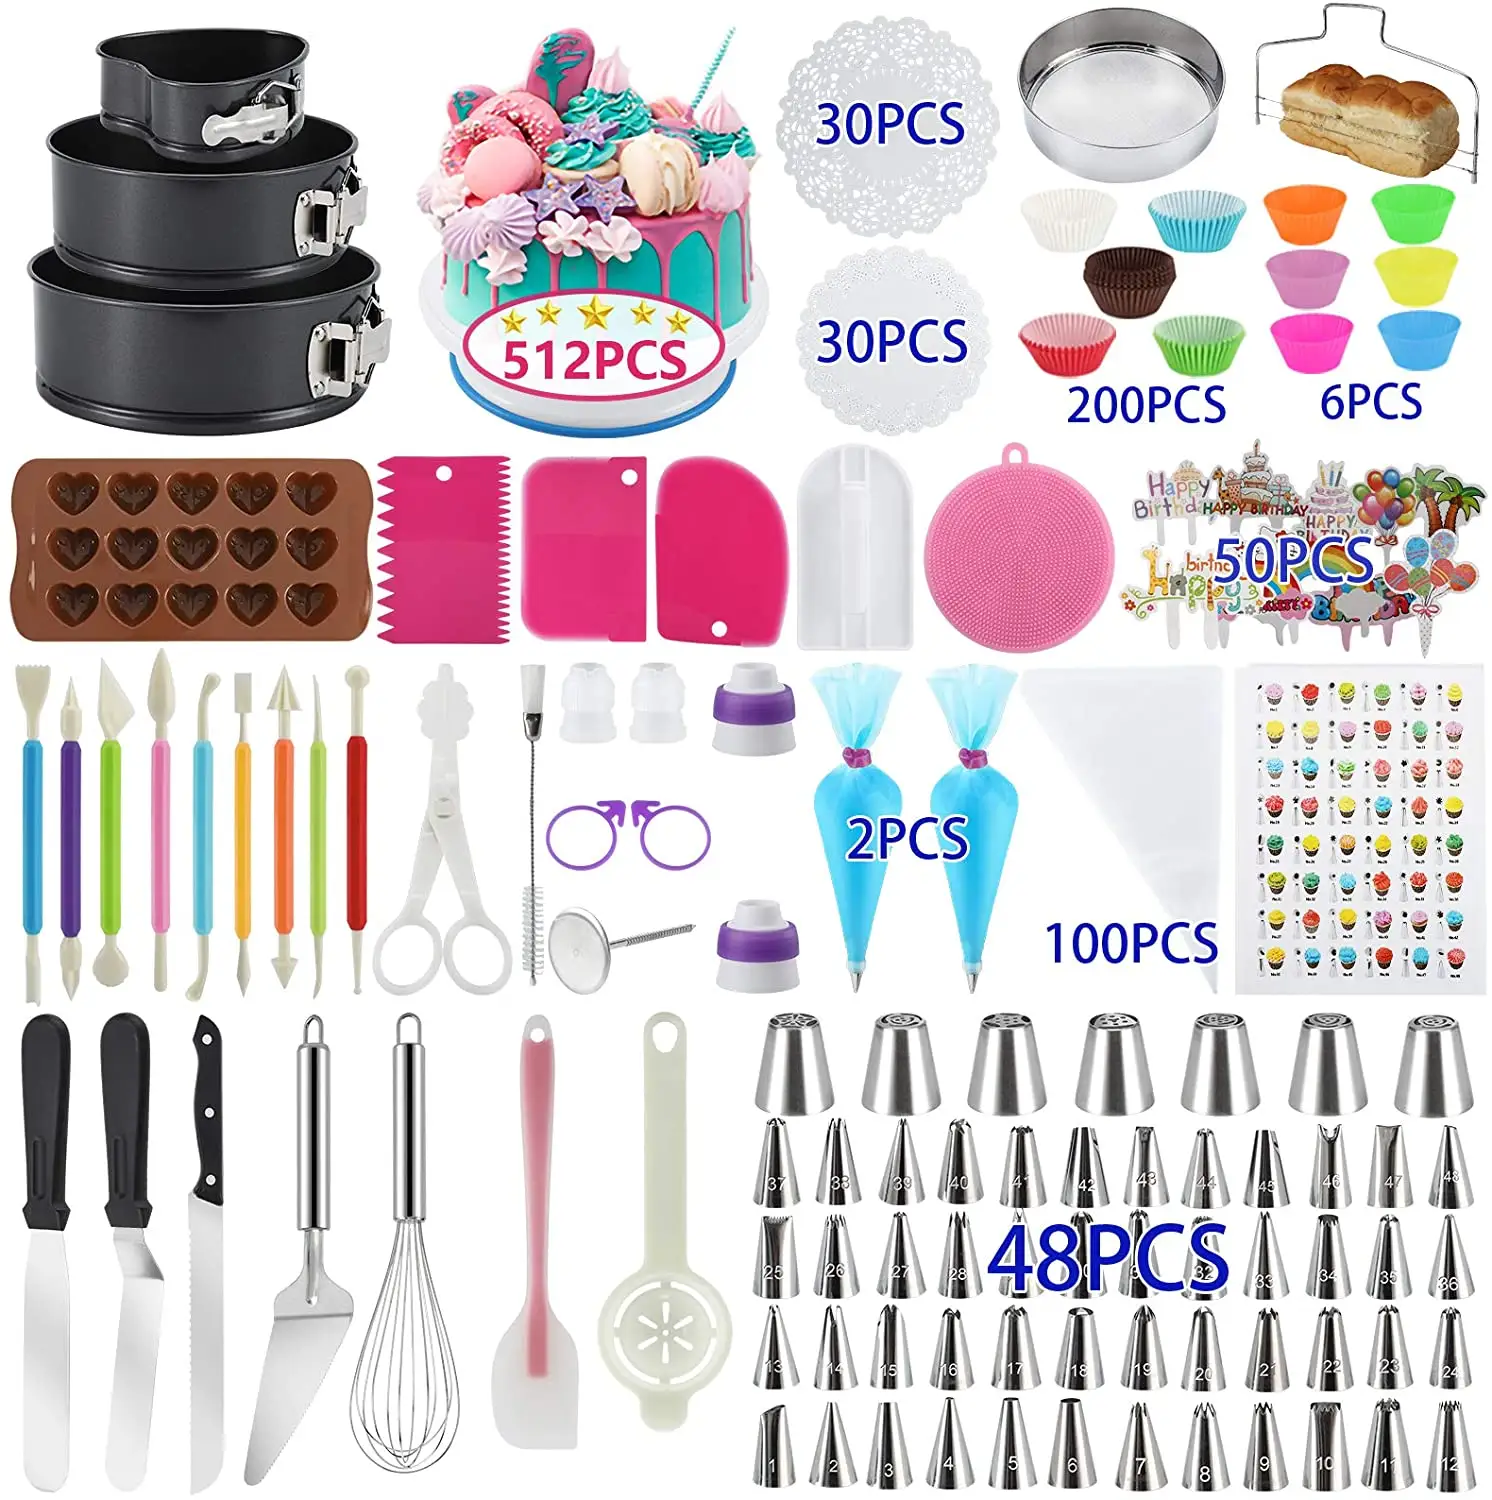 Hot Sale DIY baking tools 512pcs cake tools turntable decorating tool supplies set for kitchen accessories